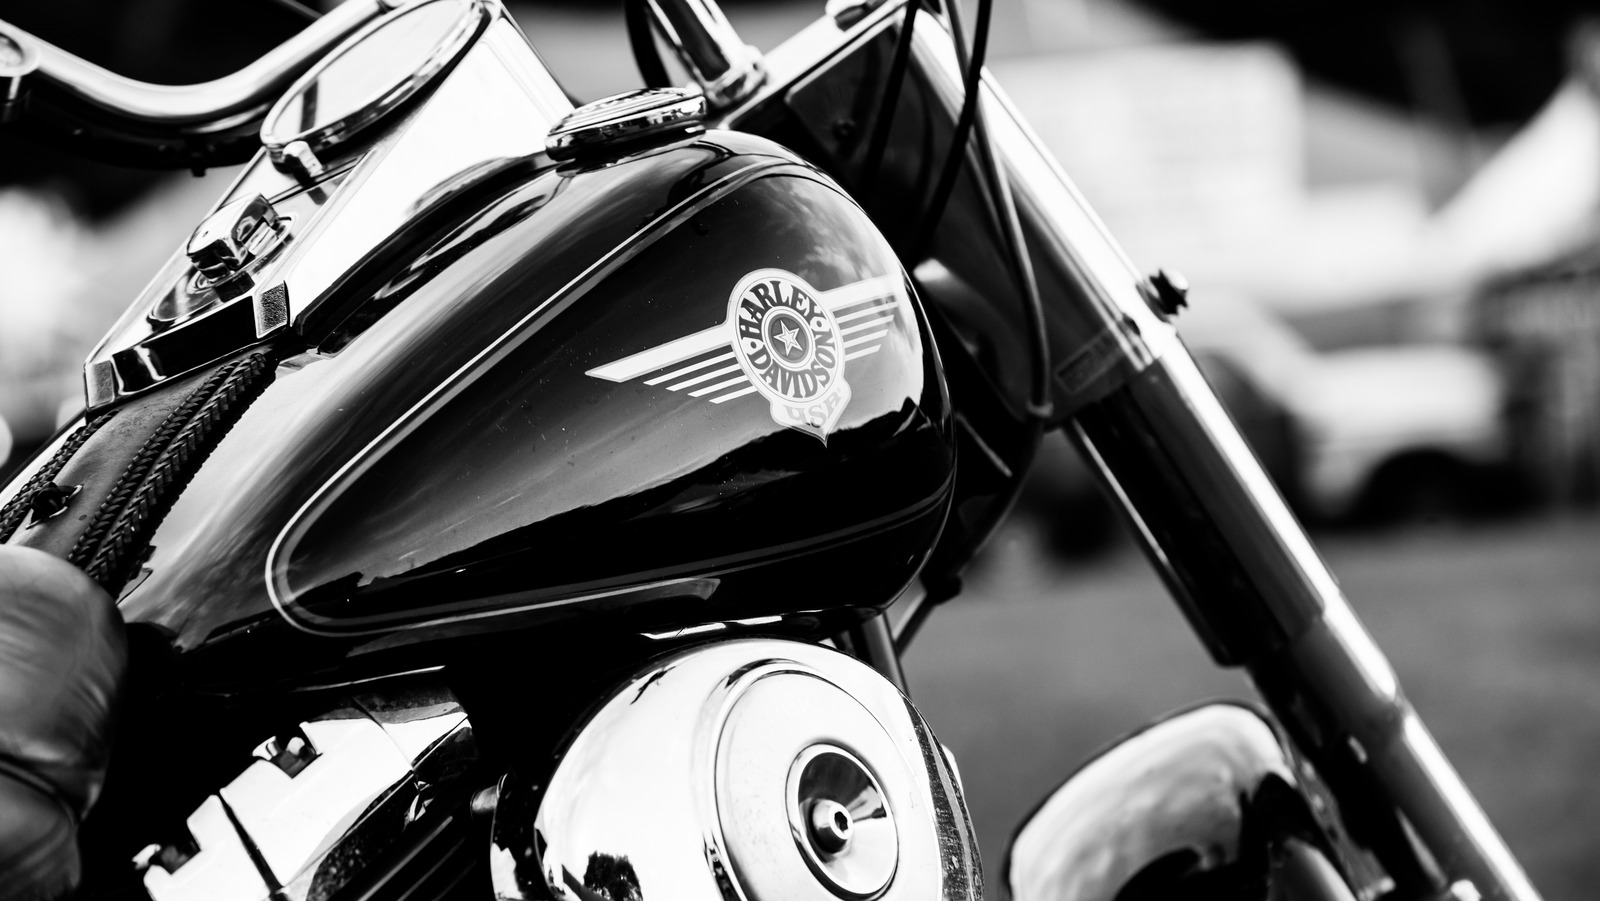 10 Little-Known Facts About Harley-Davidson Motorcycles